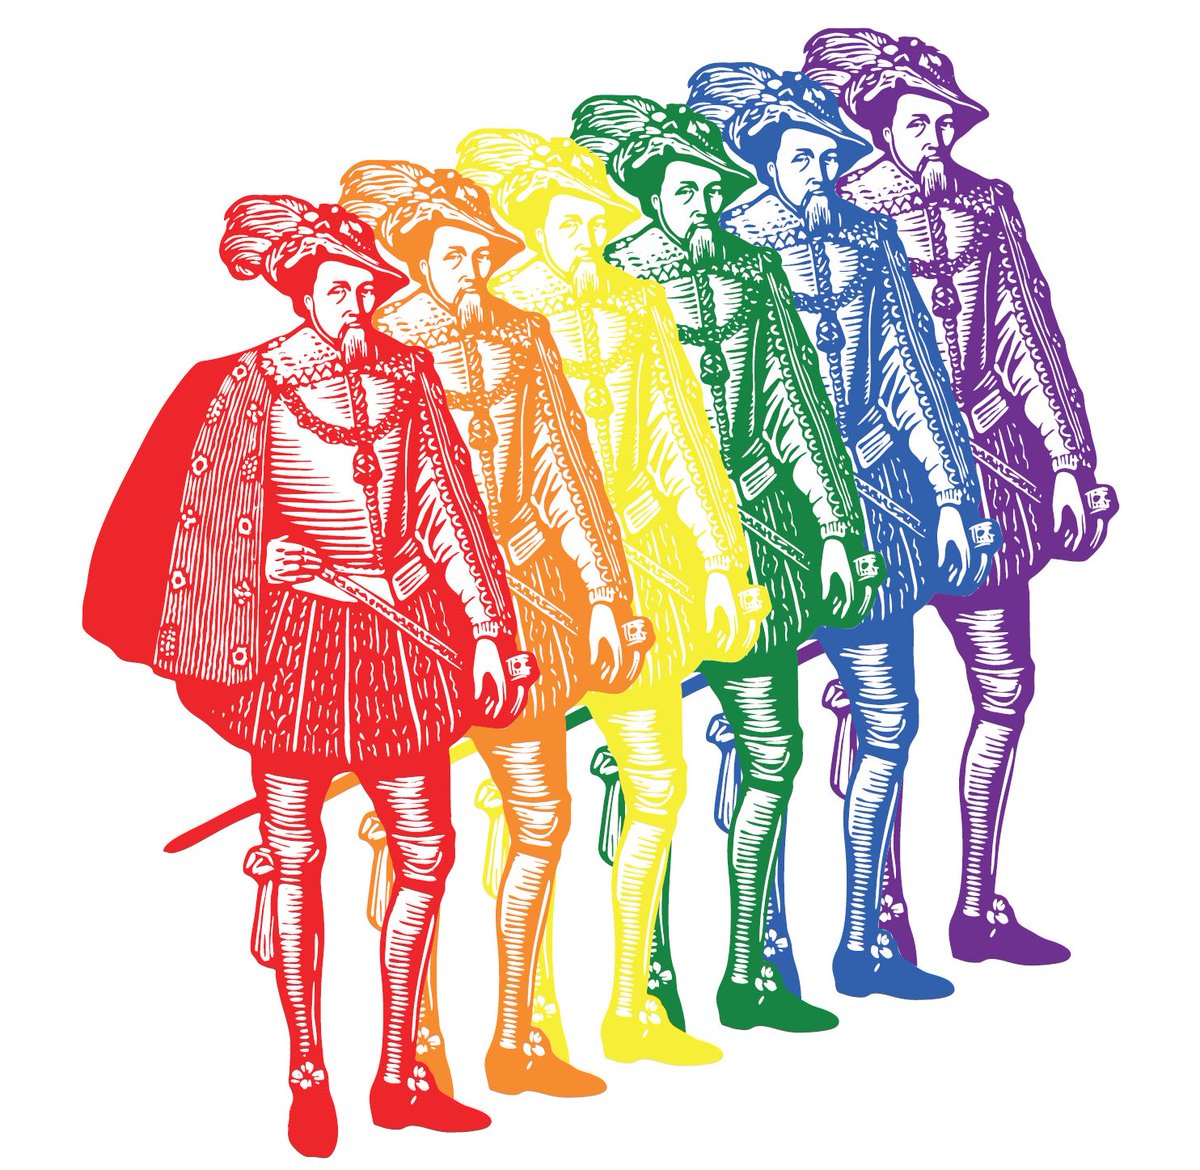 Are you ready for A Thousand Years of Kings, Queens and In-betweens? Join @Lucy_Worsley and @CuratorMatthew tomorrow at 7pm for our online talk unearthing tales of power, politics, gender and sexuality throughout British history 🌈 Register here 👉 bit.ly/LGBT-histories